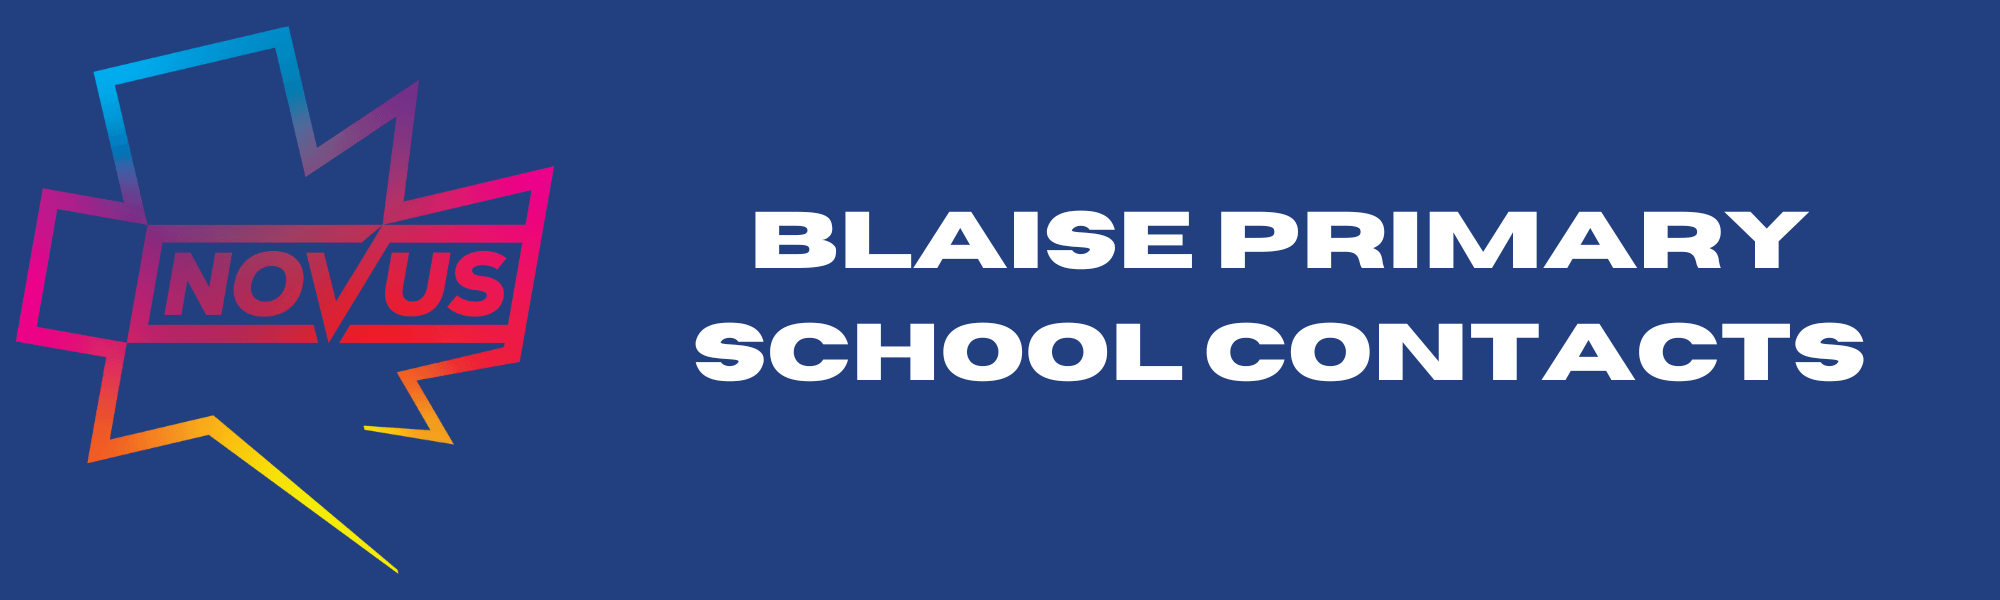 Blaise Primary School Contacts